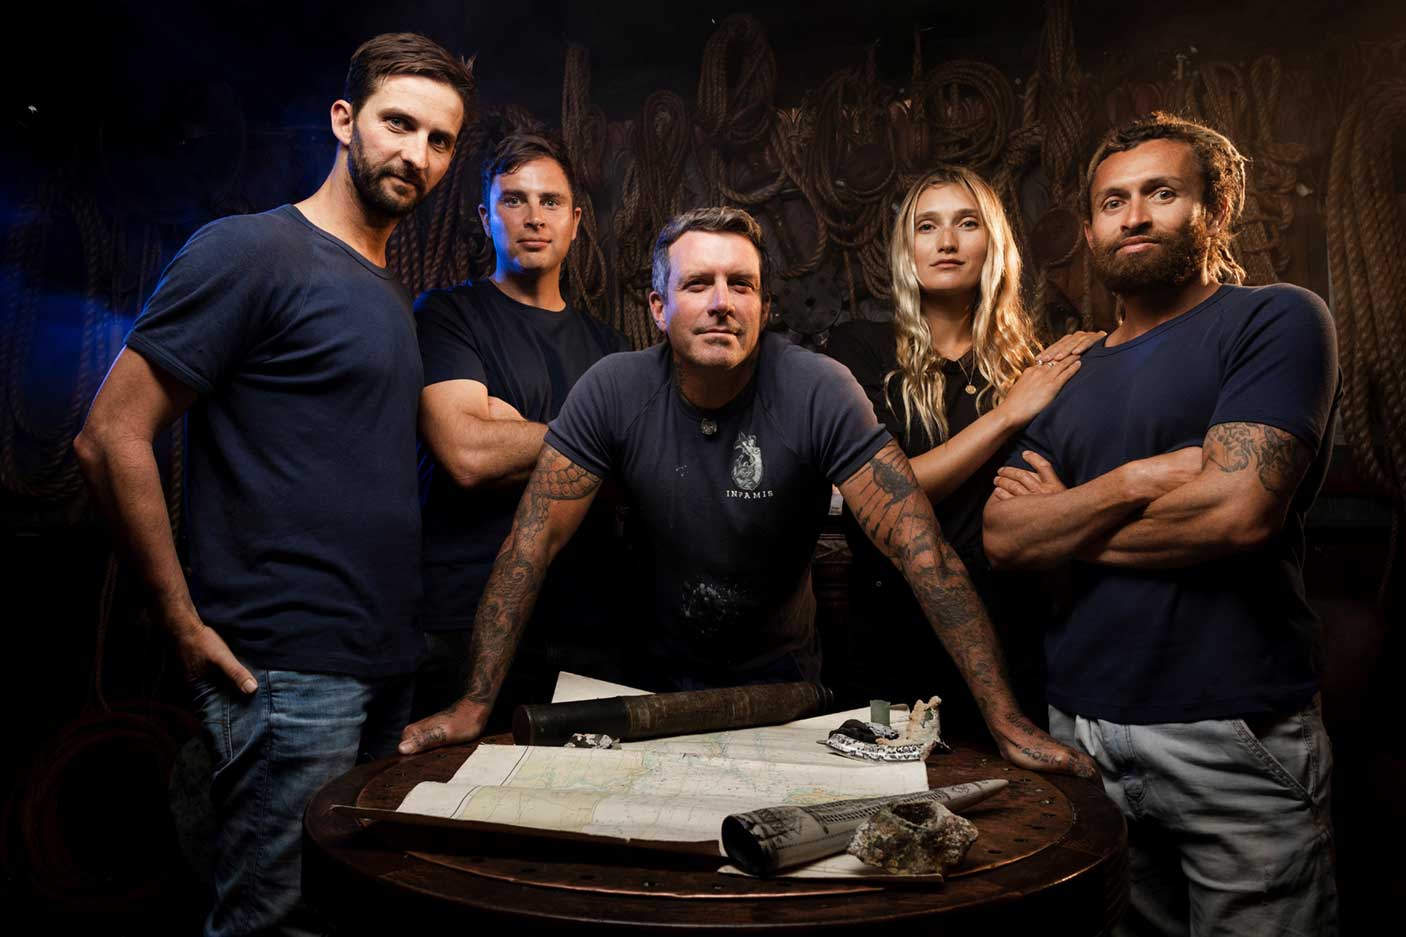 Cast of Shipwreck Hunters Australia standing around a round table with a map